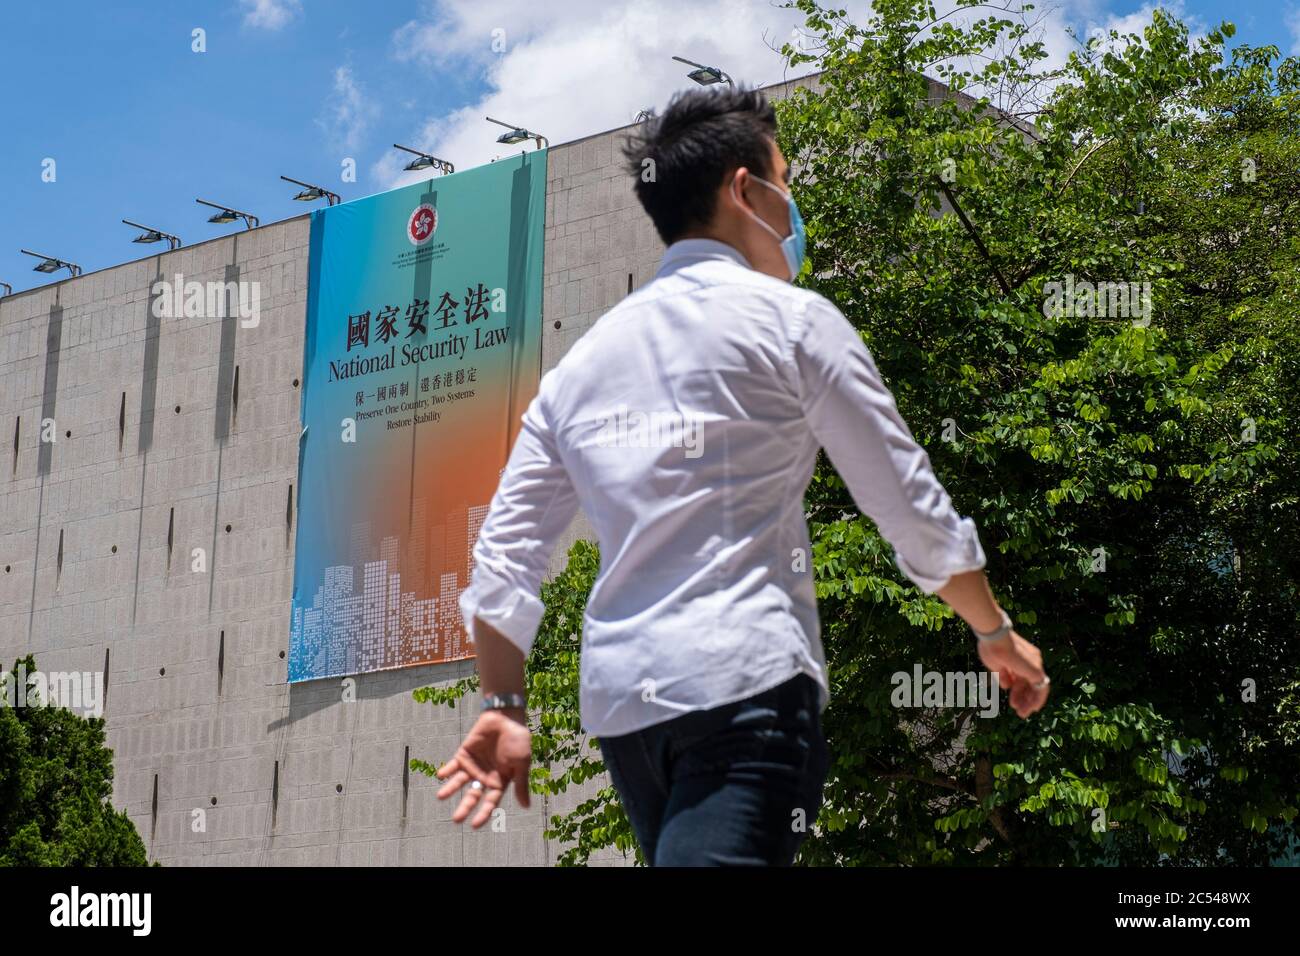 A government sponsored advertisement promoting the new national security law display on a building in Hong Kong. Stock Photo